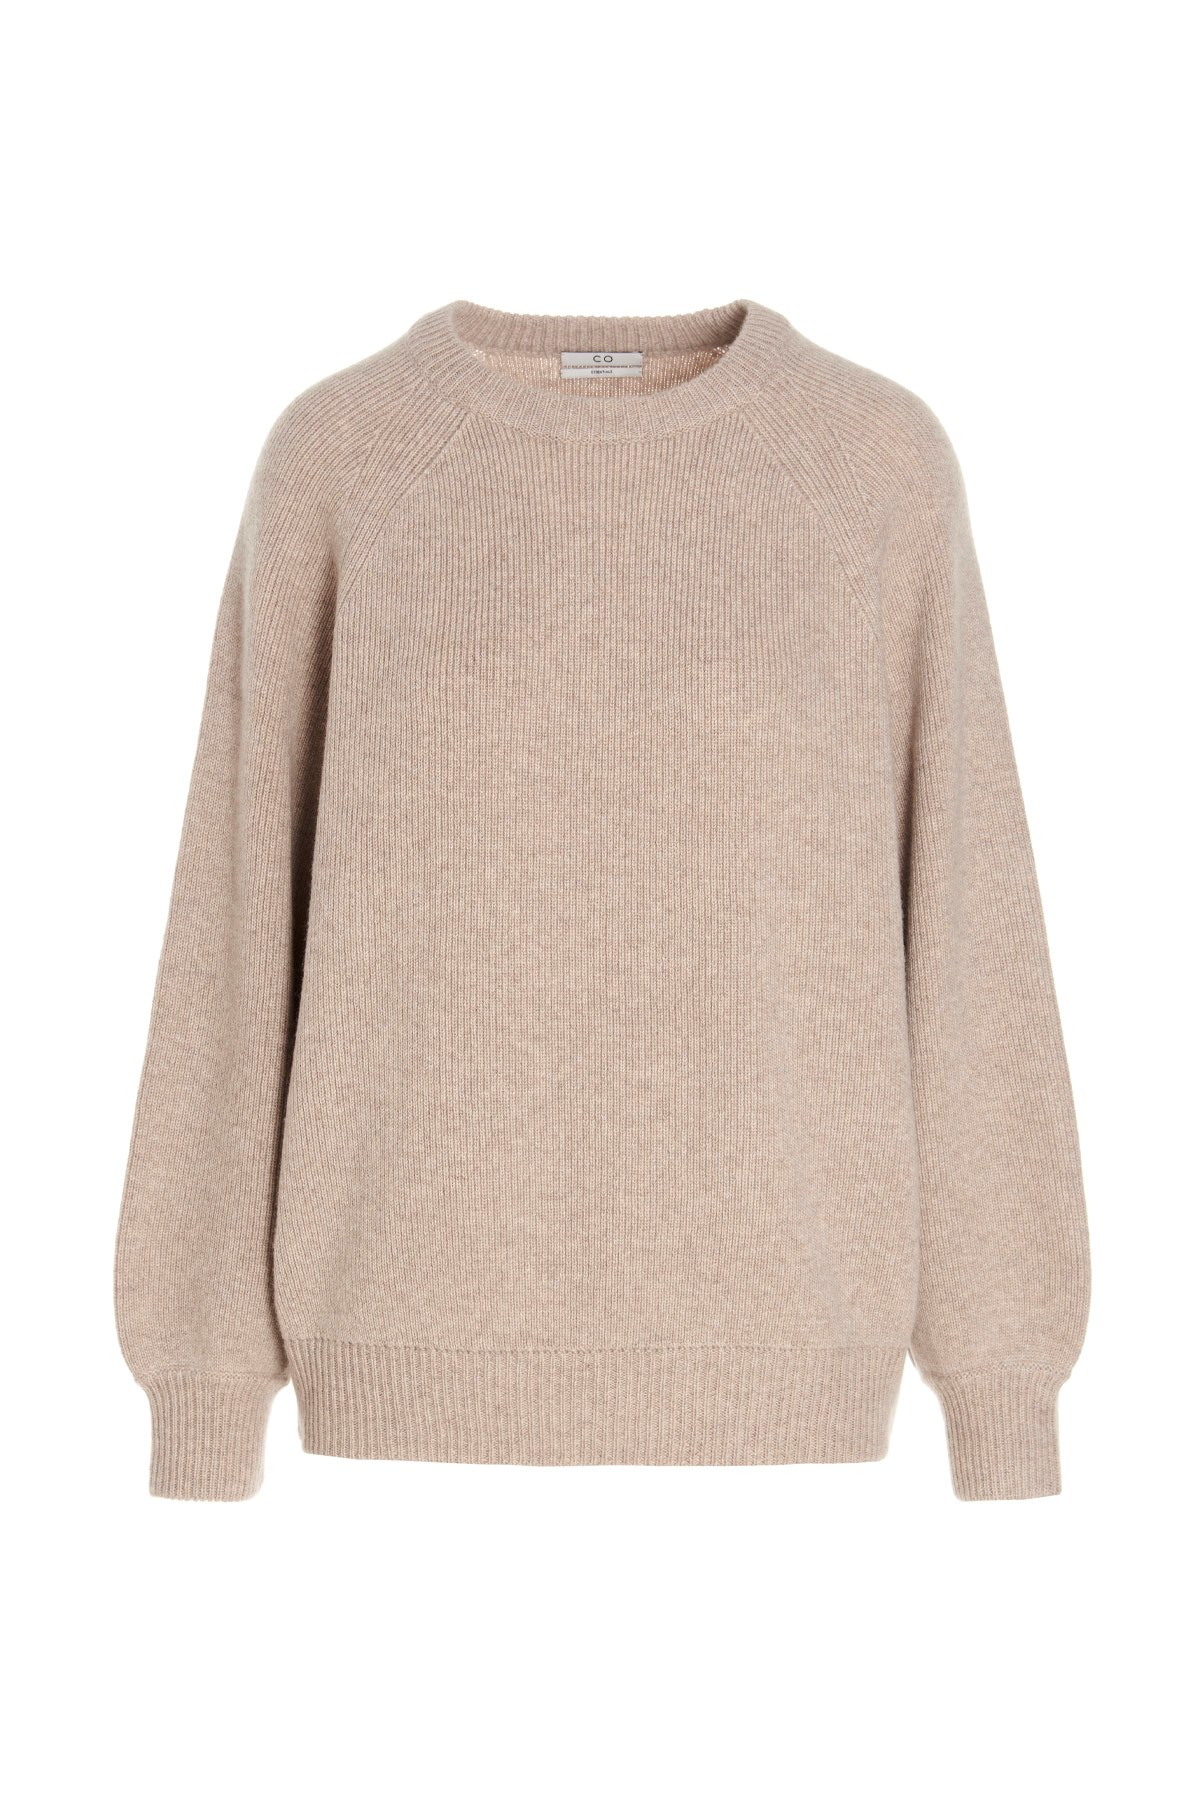 CO Ribbed Cashmere Sweater